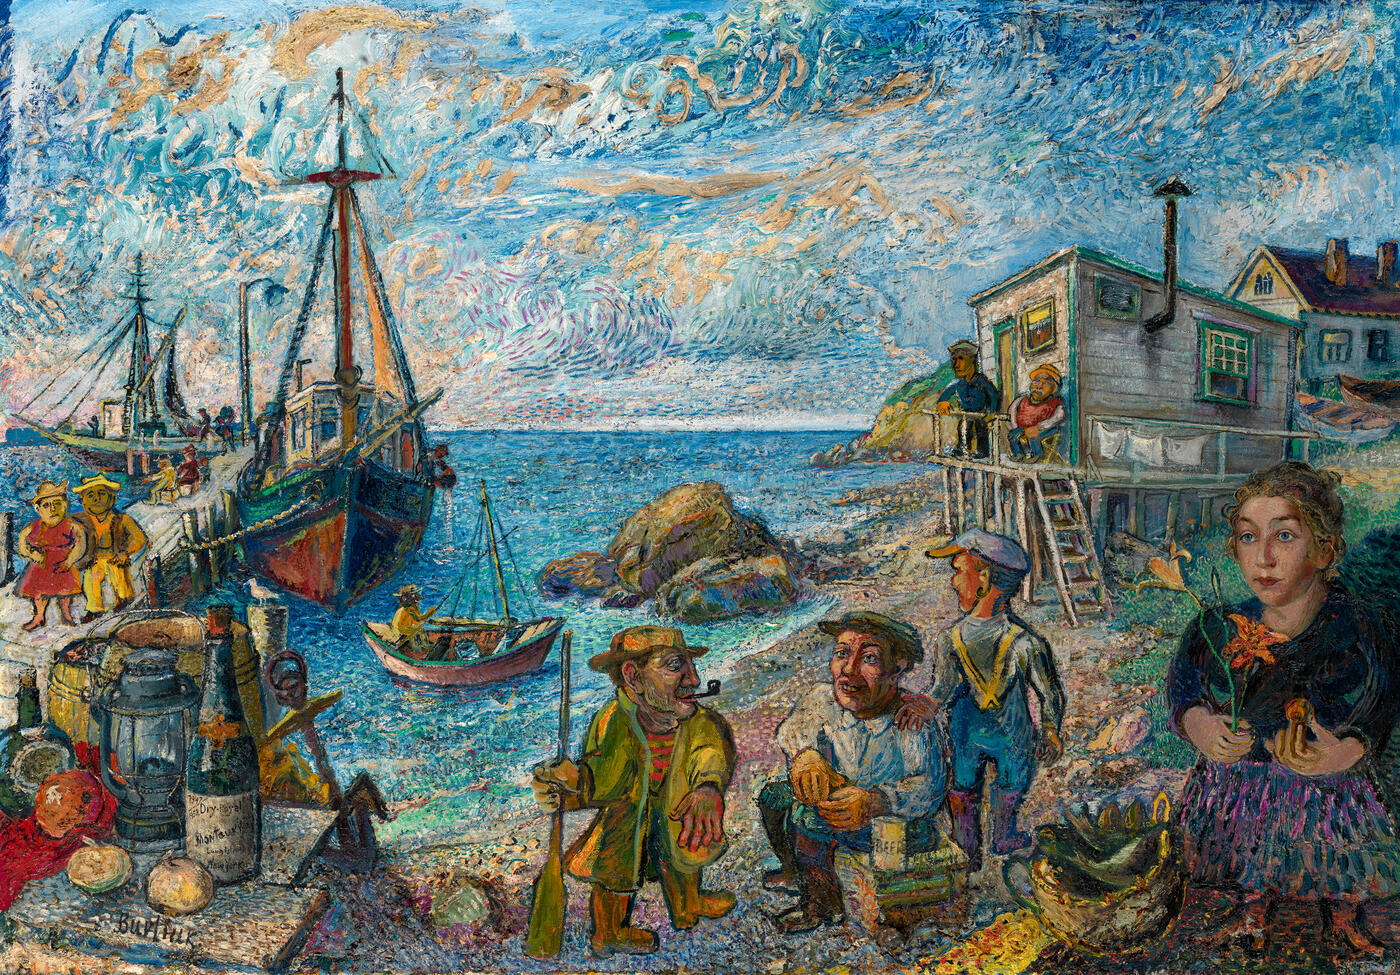 Fisherman and the Artist's Wife on the Long Island's Shore